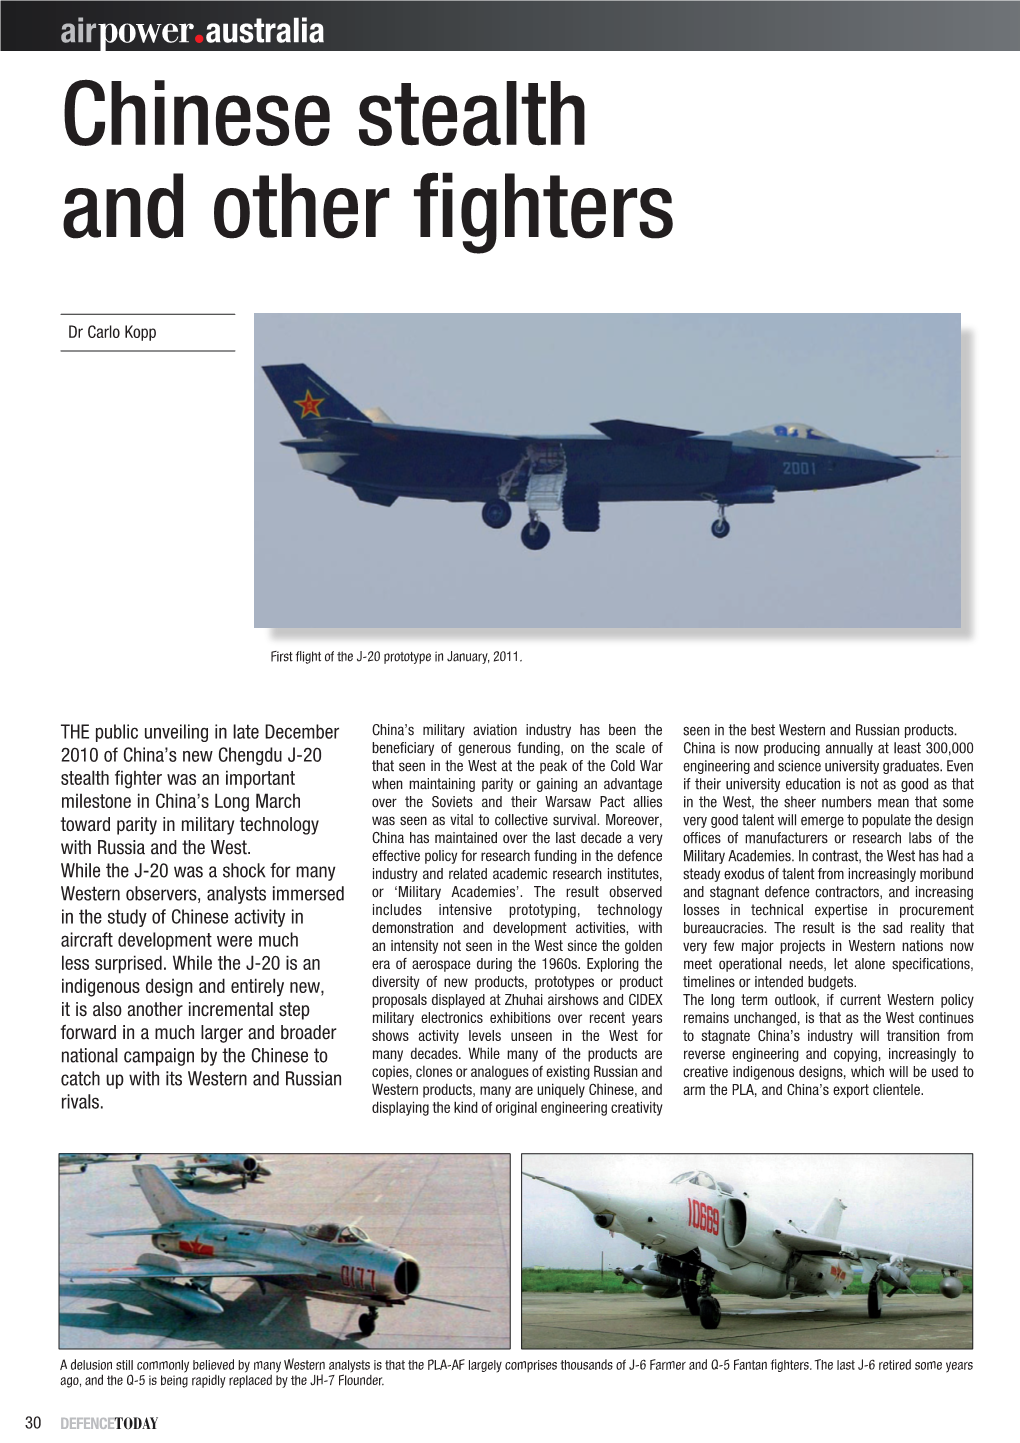 Chinese Stealth and Other Fighters